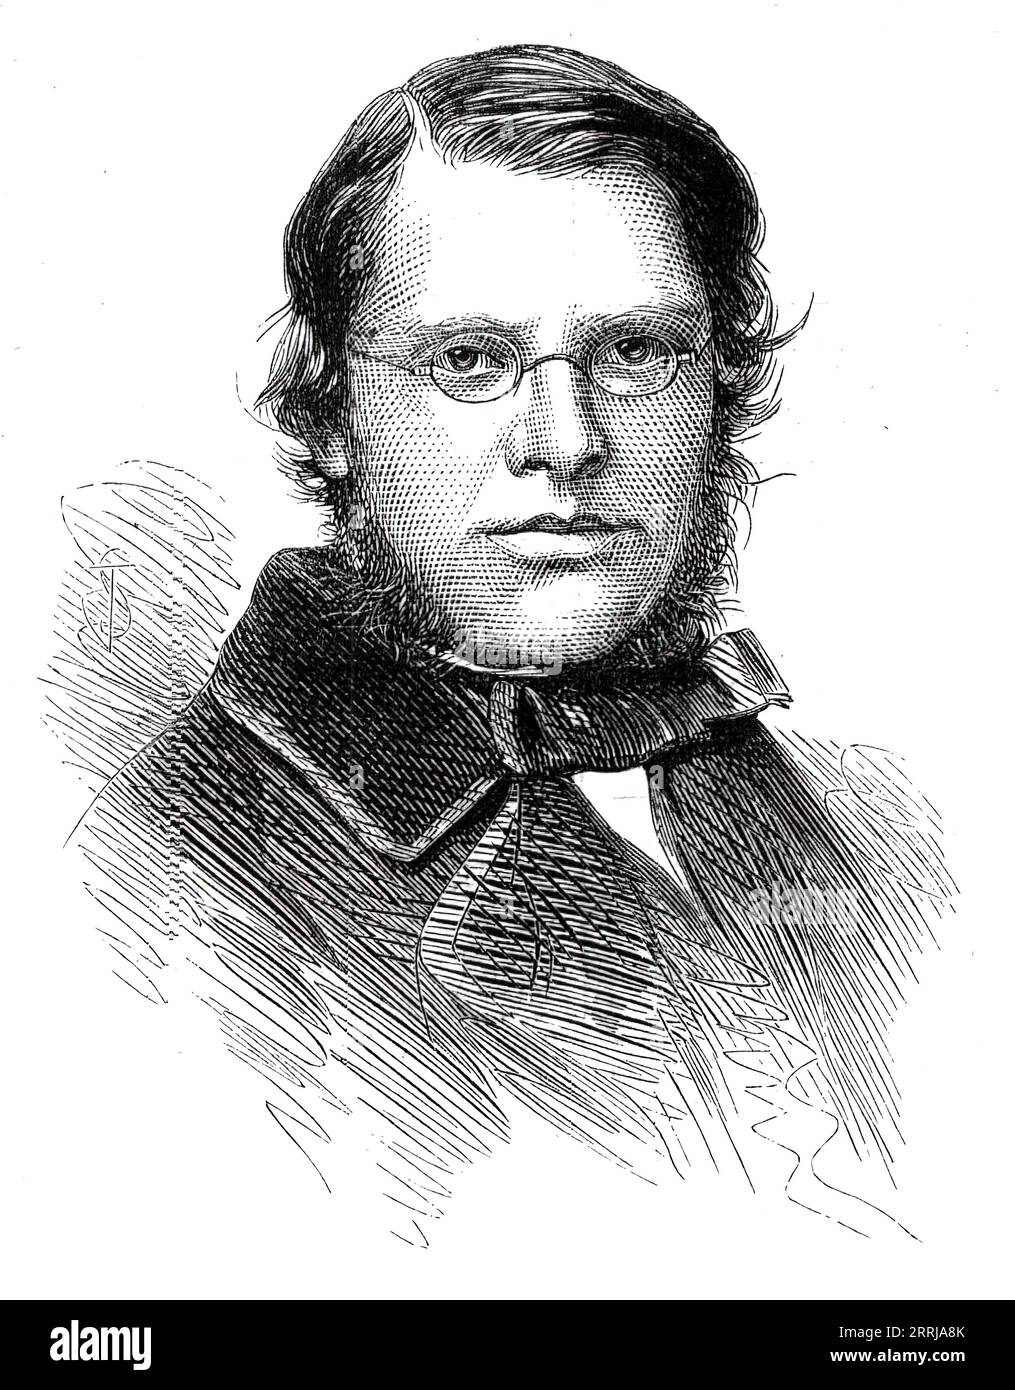 The late Mr. G. W. Thornbury, 1876. Engraving from a photograph by Mr. Charles Watkins of Parliament-street. 'George Walter Thornbury, a well-known and popular author, whose death we announced last week, was born in 1828, the son of Mr. Thornbury, a solicitor. His numerous contributions to the literature of the day were highly appreciated; the best remembered are: &quot;Monarchs of the Main,&quot; &quot;Shakspeare's England during the Reign of Elizabeth,&quot; &quot;Songs of Cavaliers and Roundheads,&quot; &quot;True as Steel,&quot; &quot;British Artists from Hogarth to Turner,&quot; &quot;Ice Stock Photo